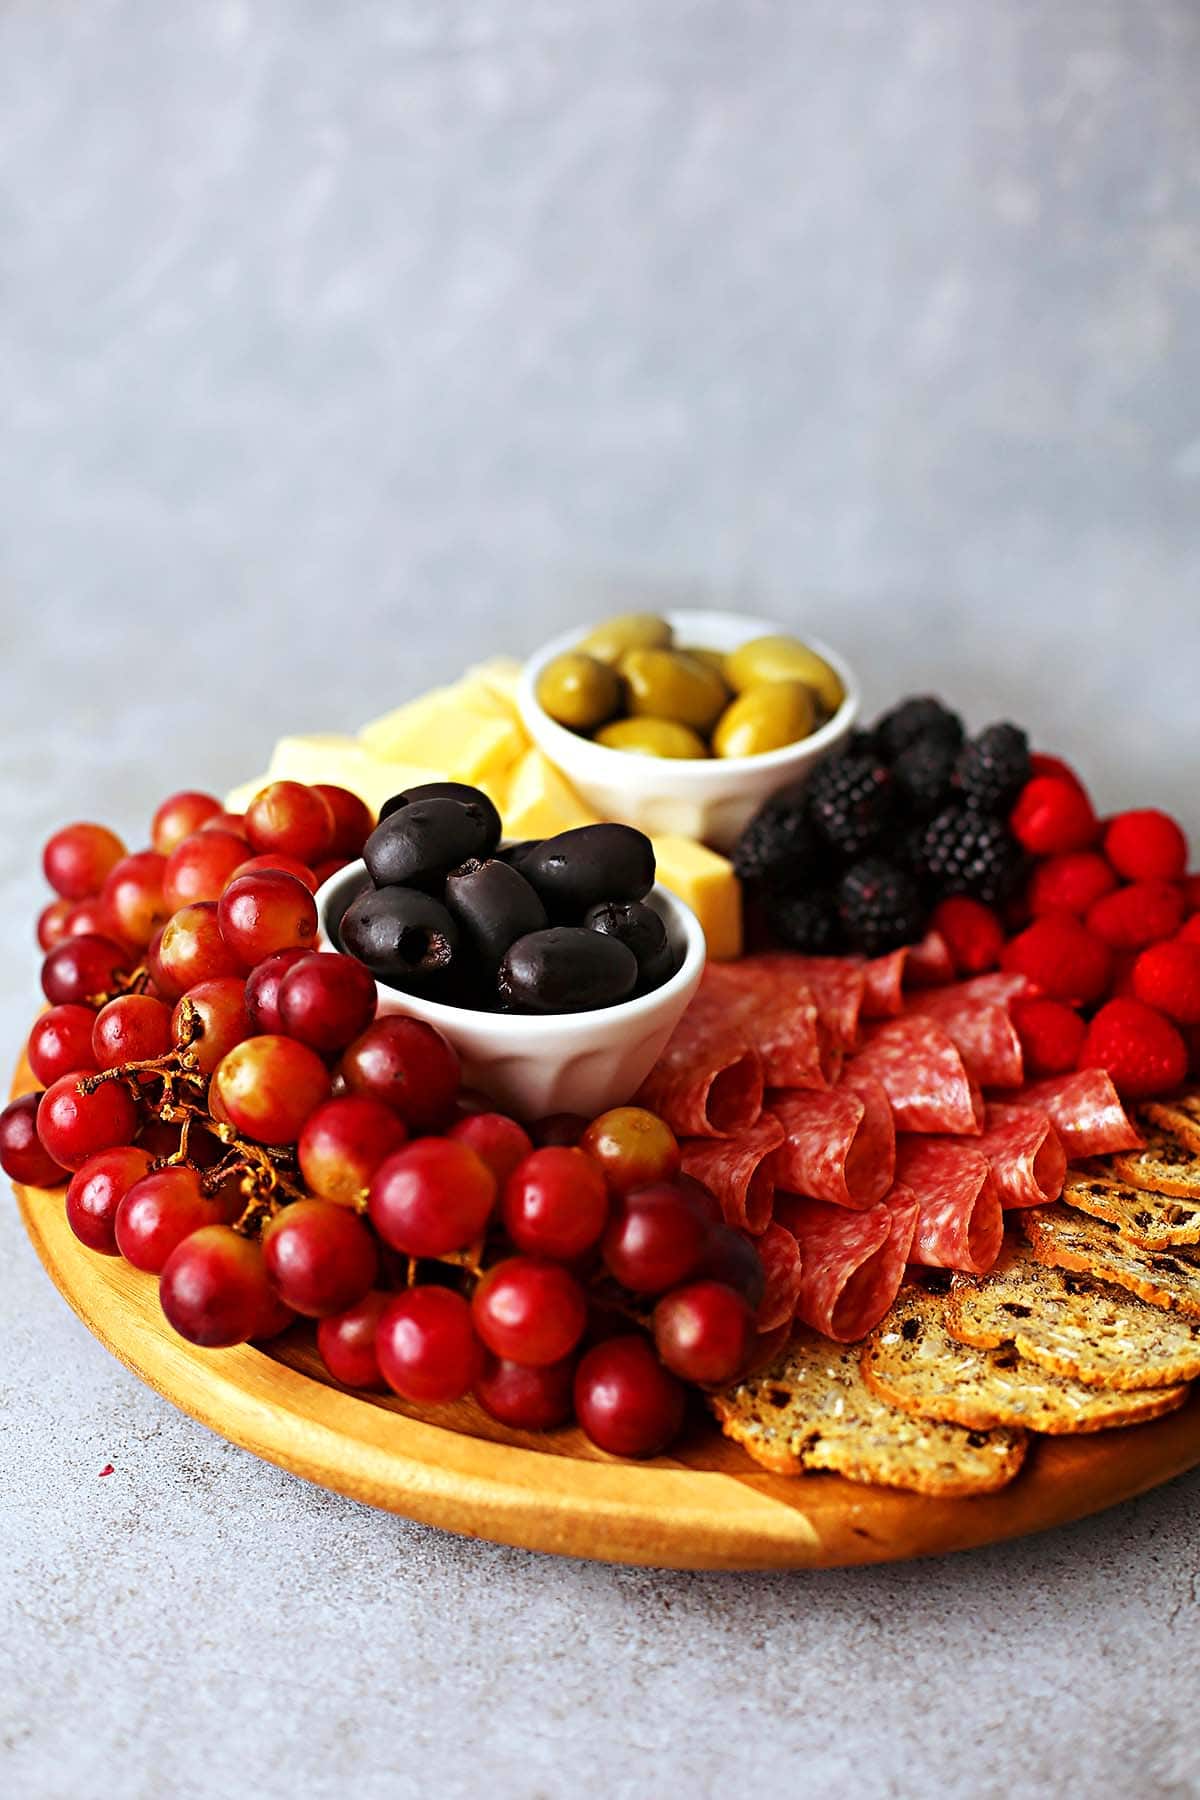 small wooden charcuterie board filled with colorful fruits, crackers, olives.